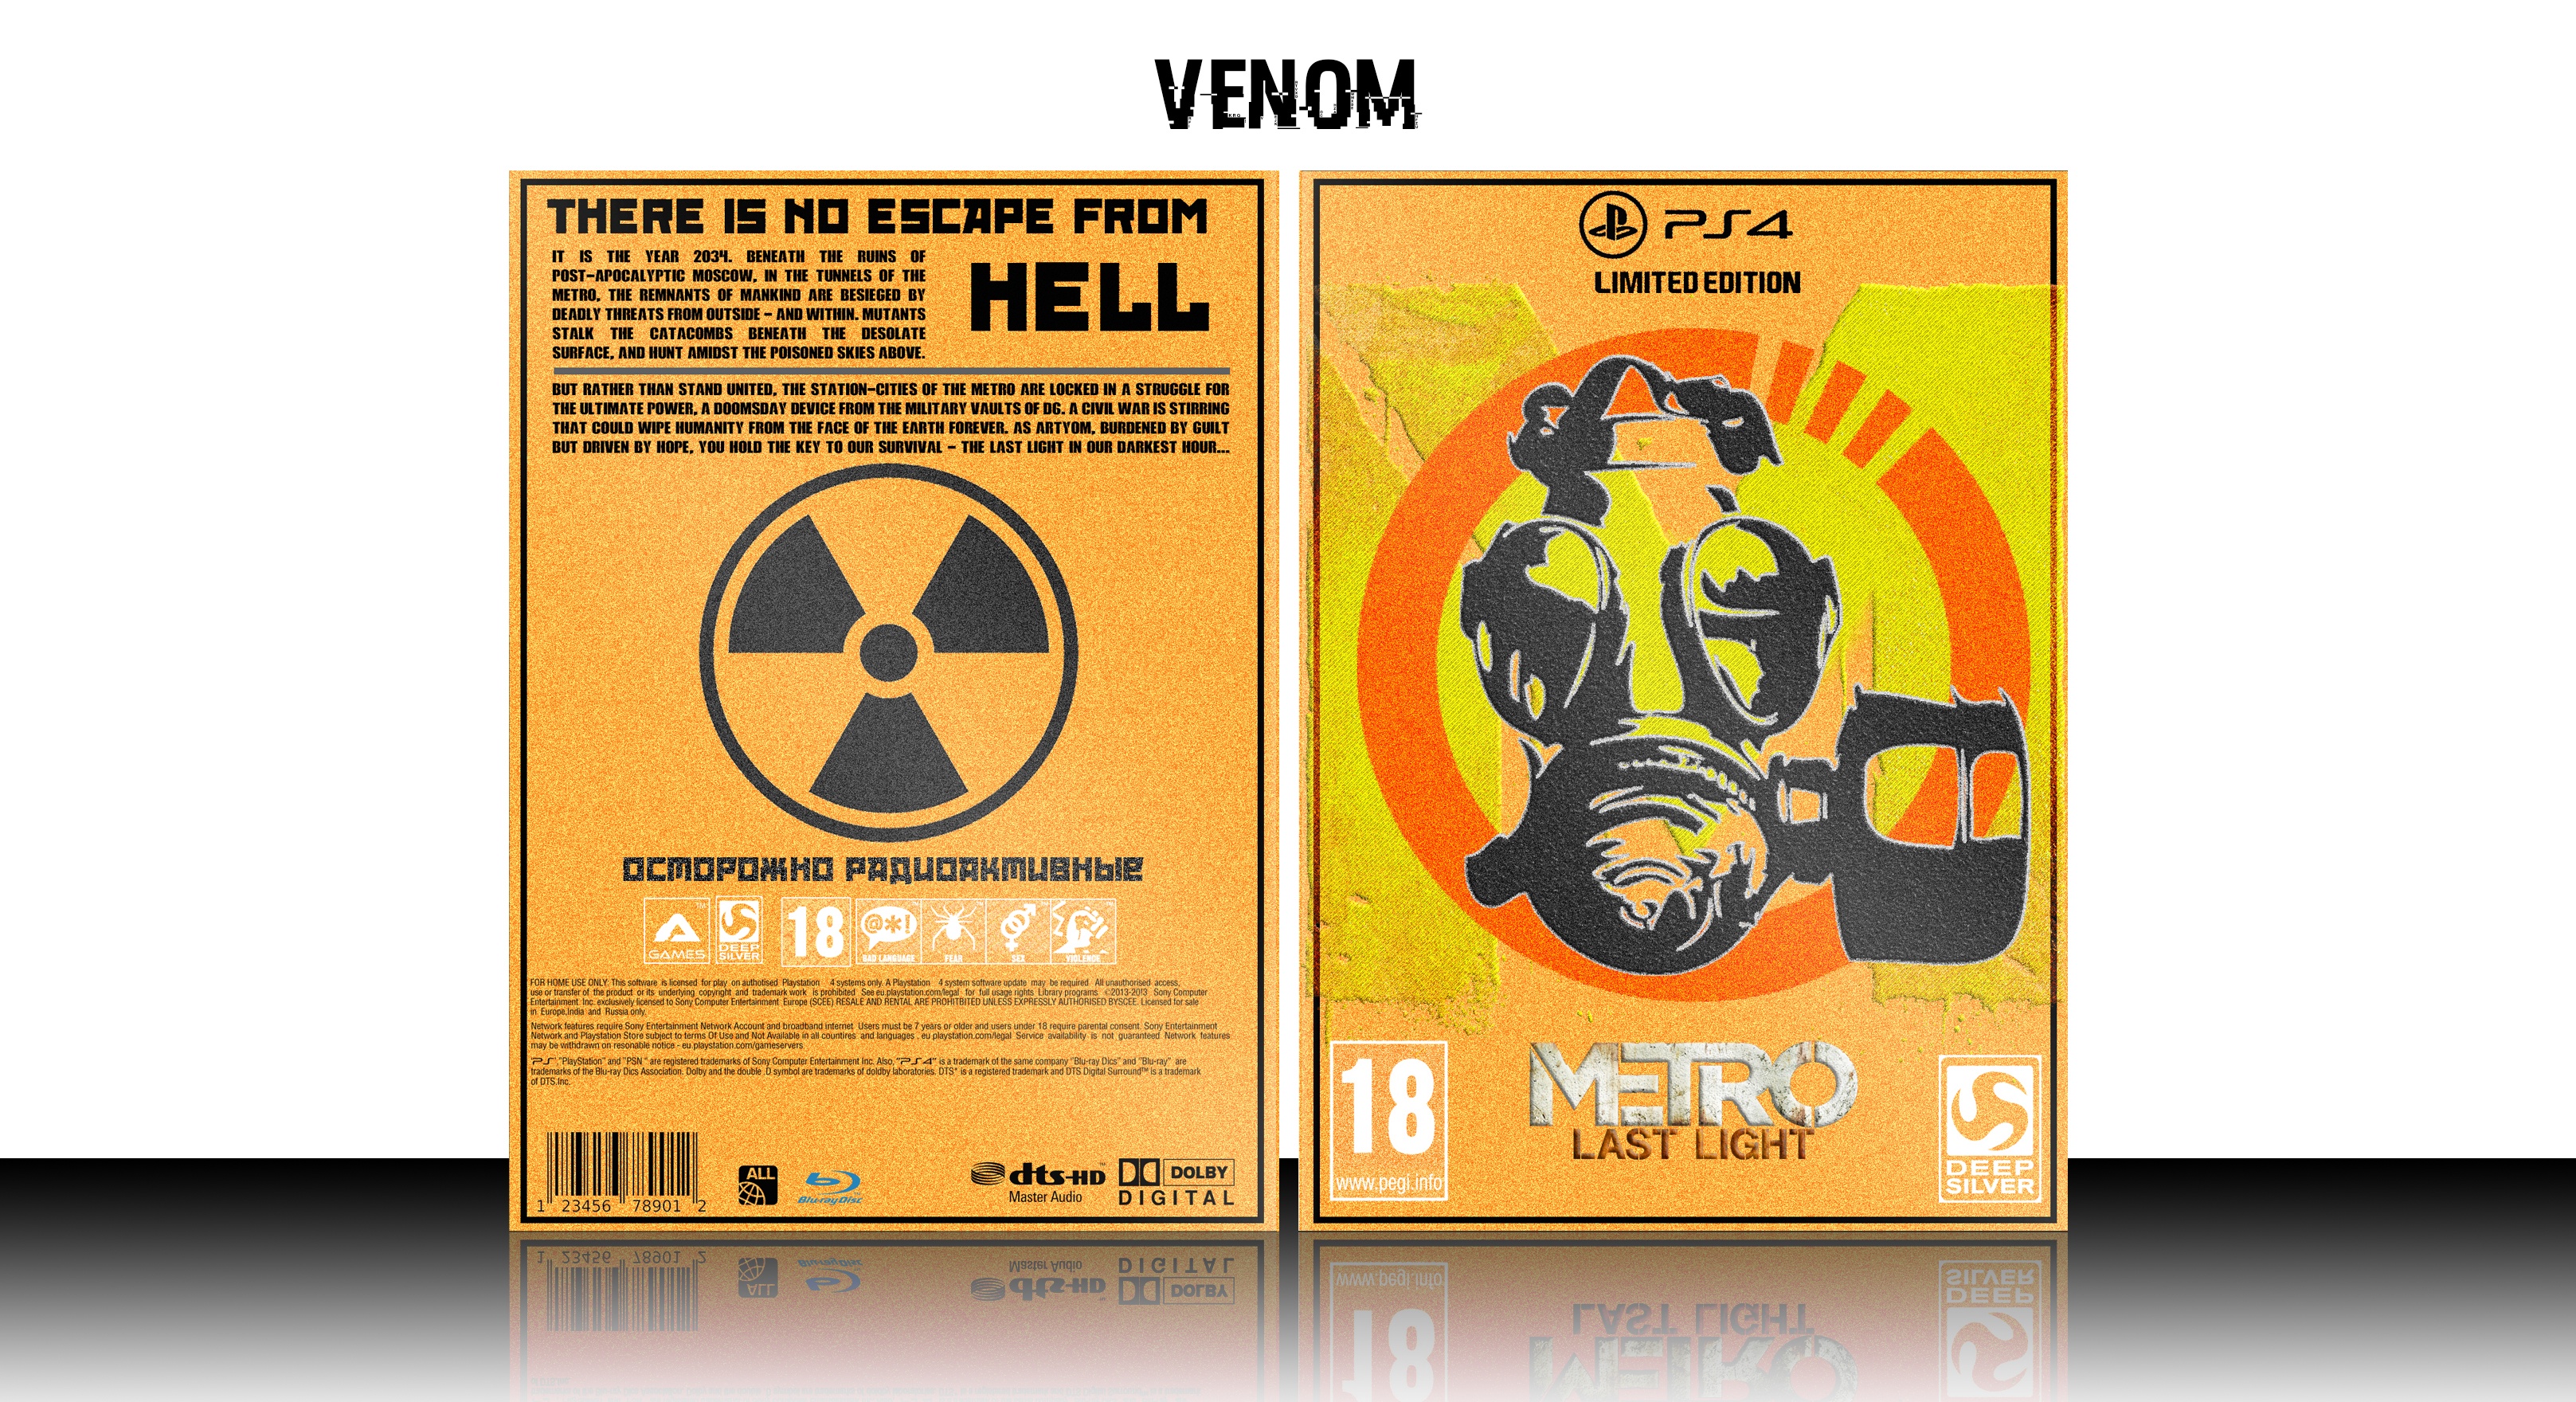 Metro: Last Light Limited Edition box cover